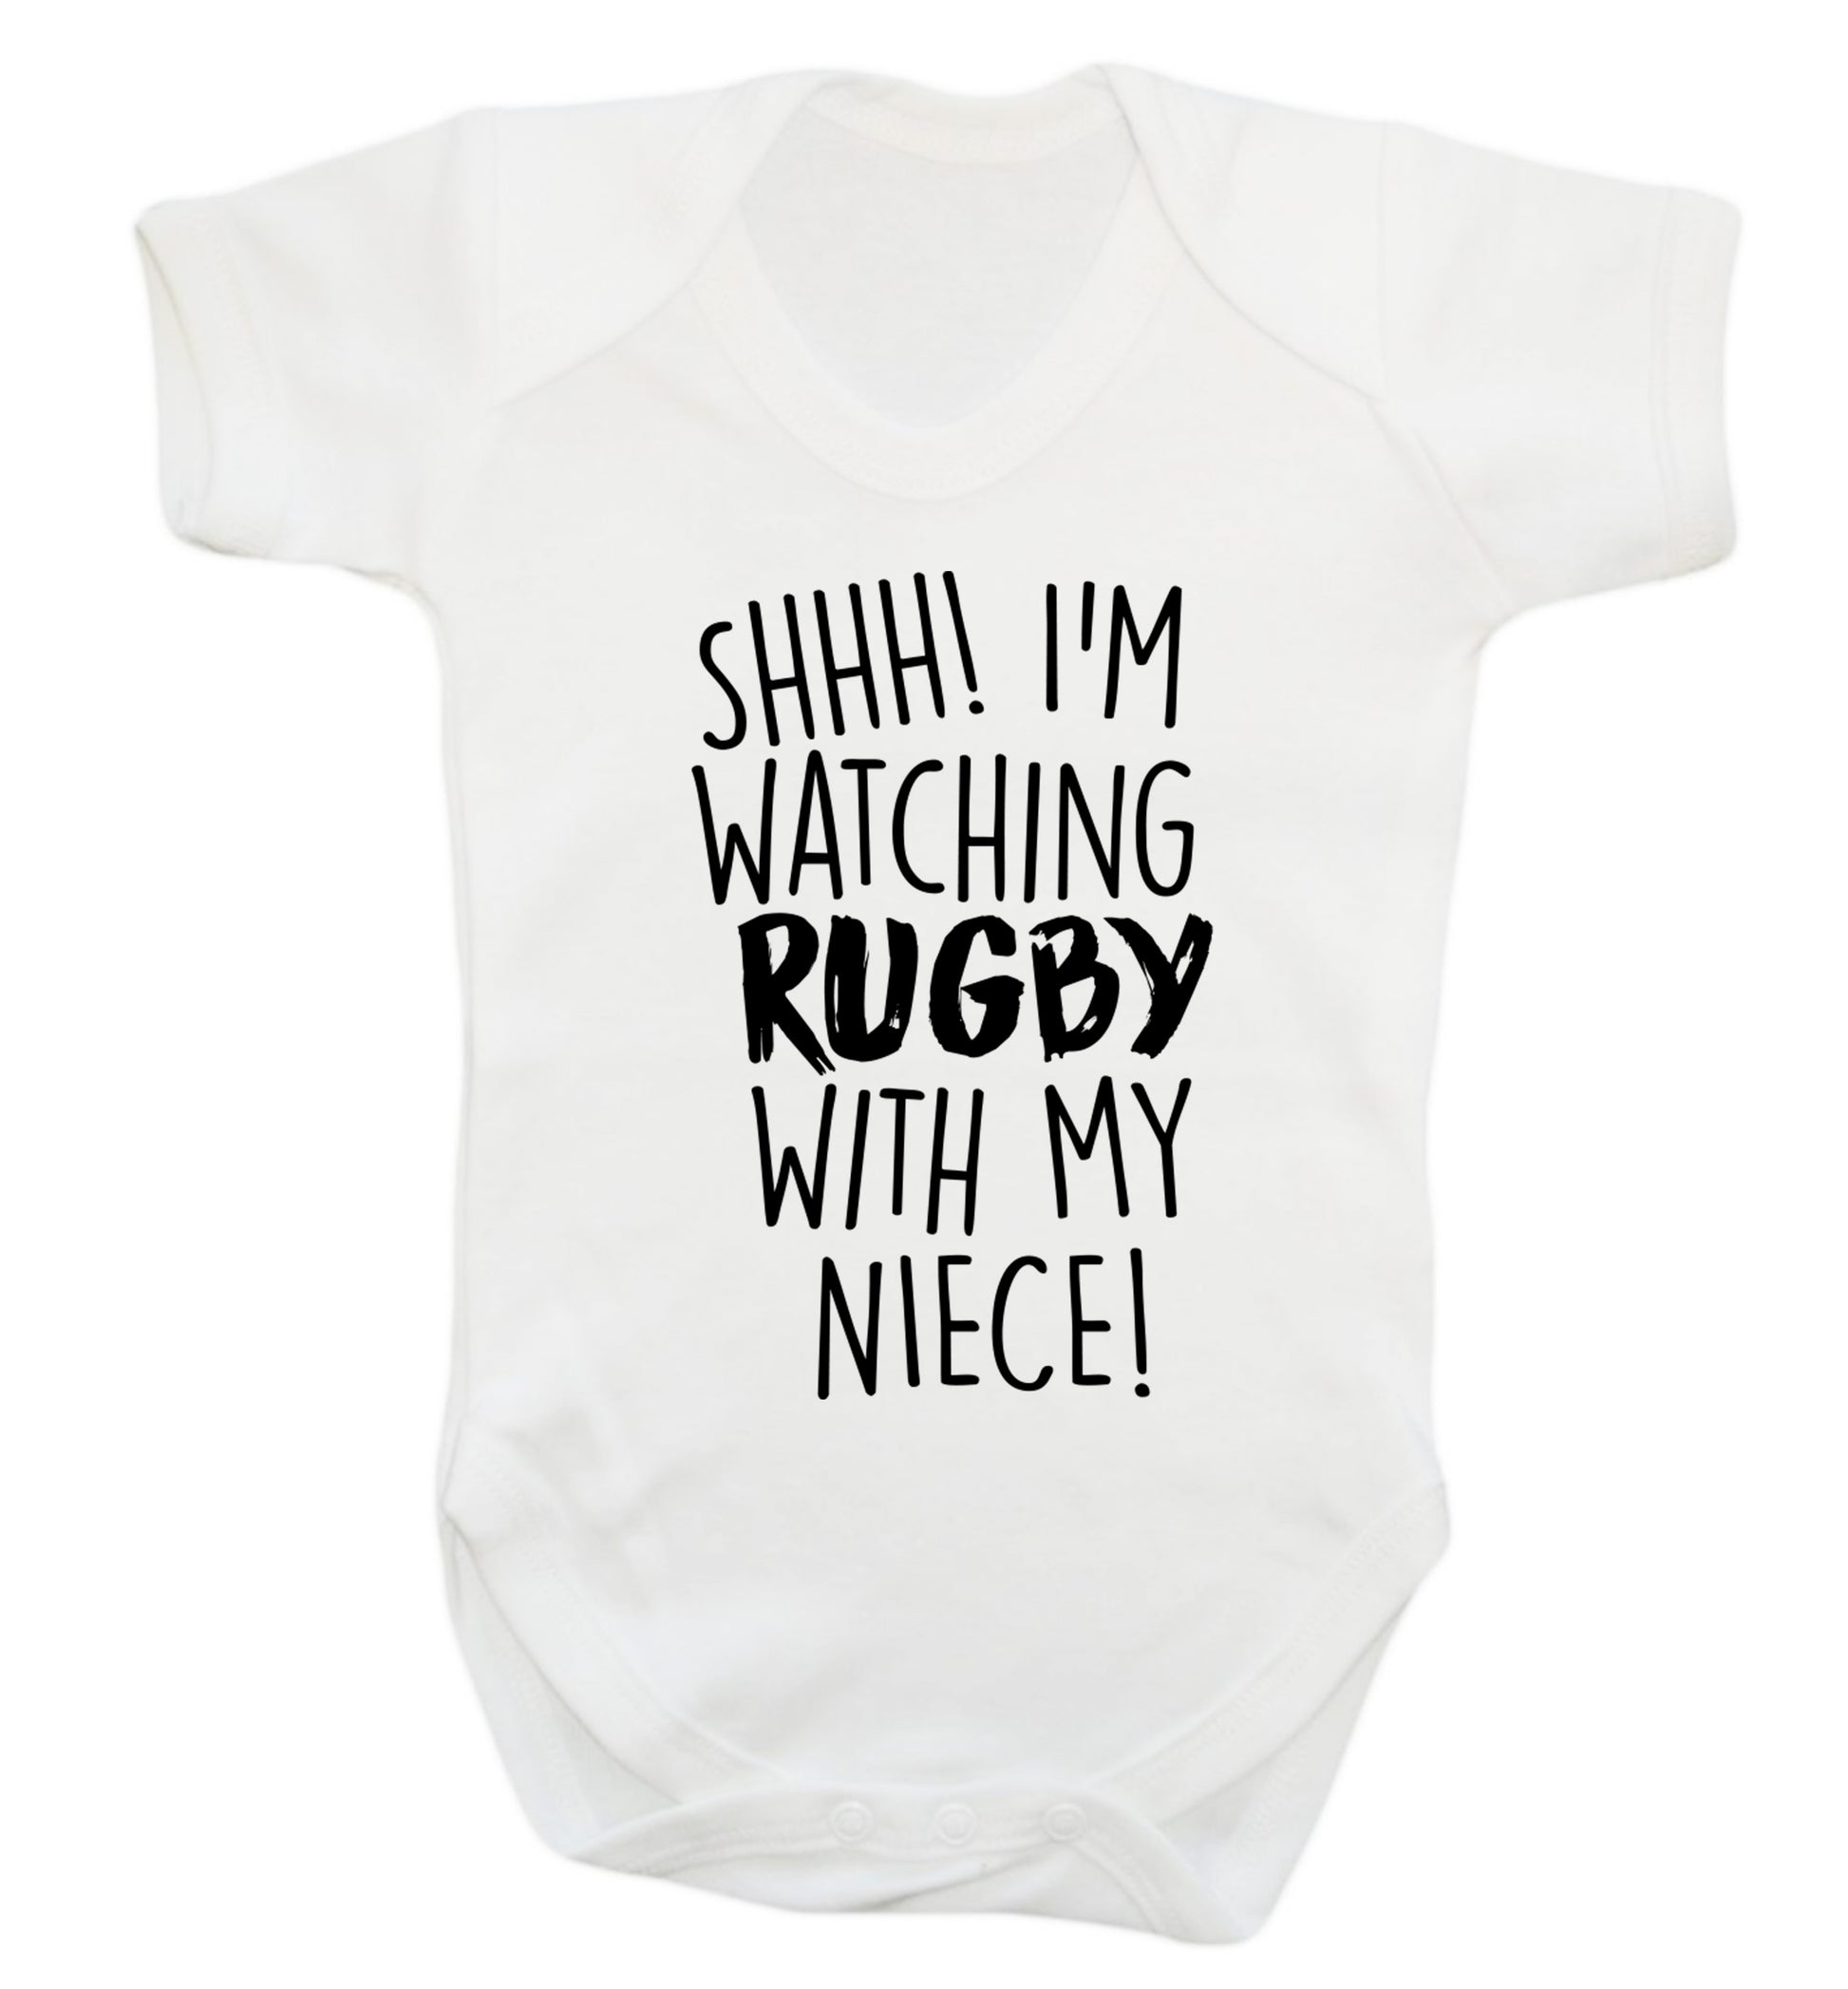 Shh.. I'm watching rugby with my niece Baby Vest white 18-24 months